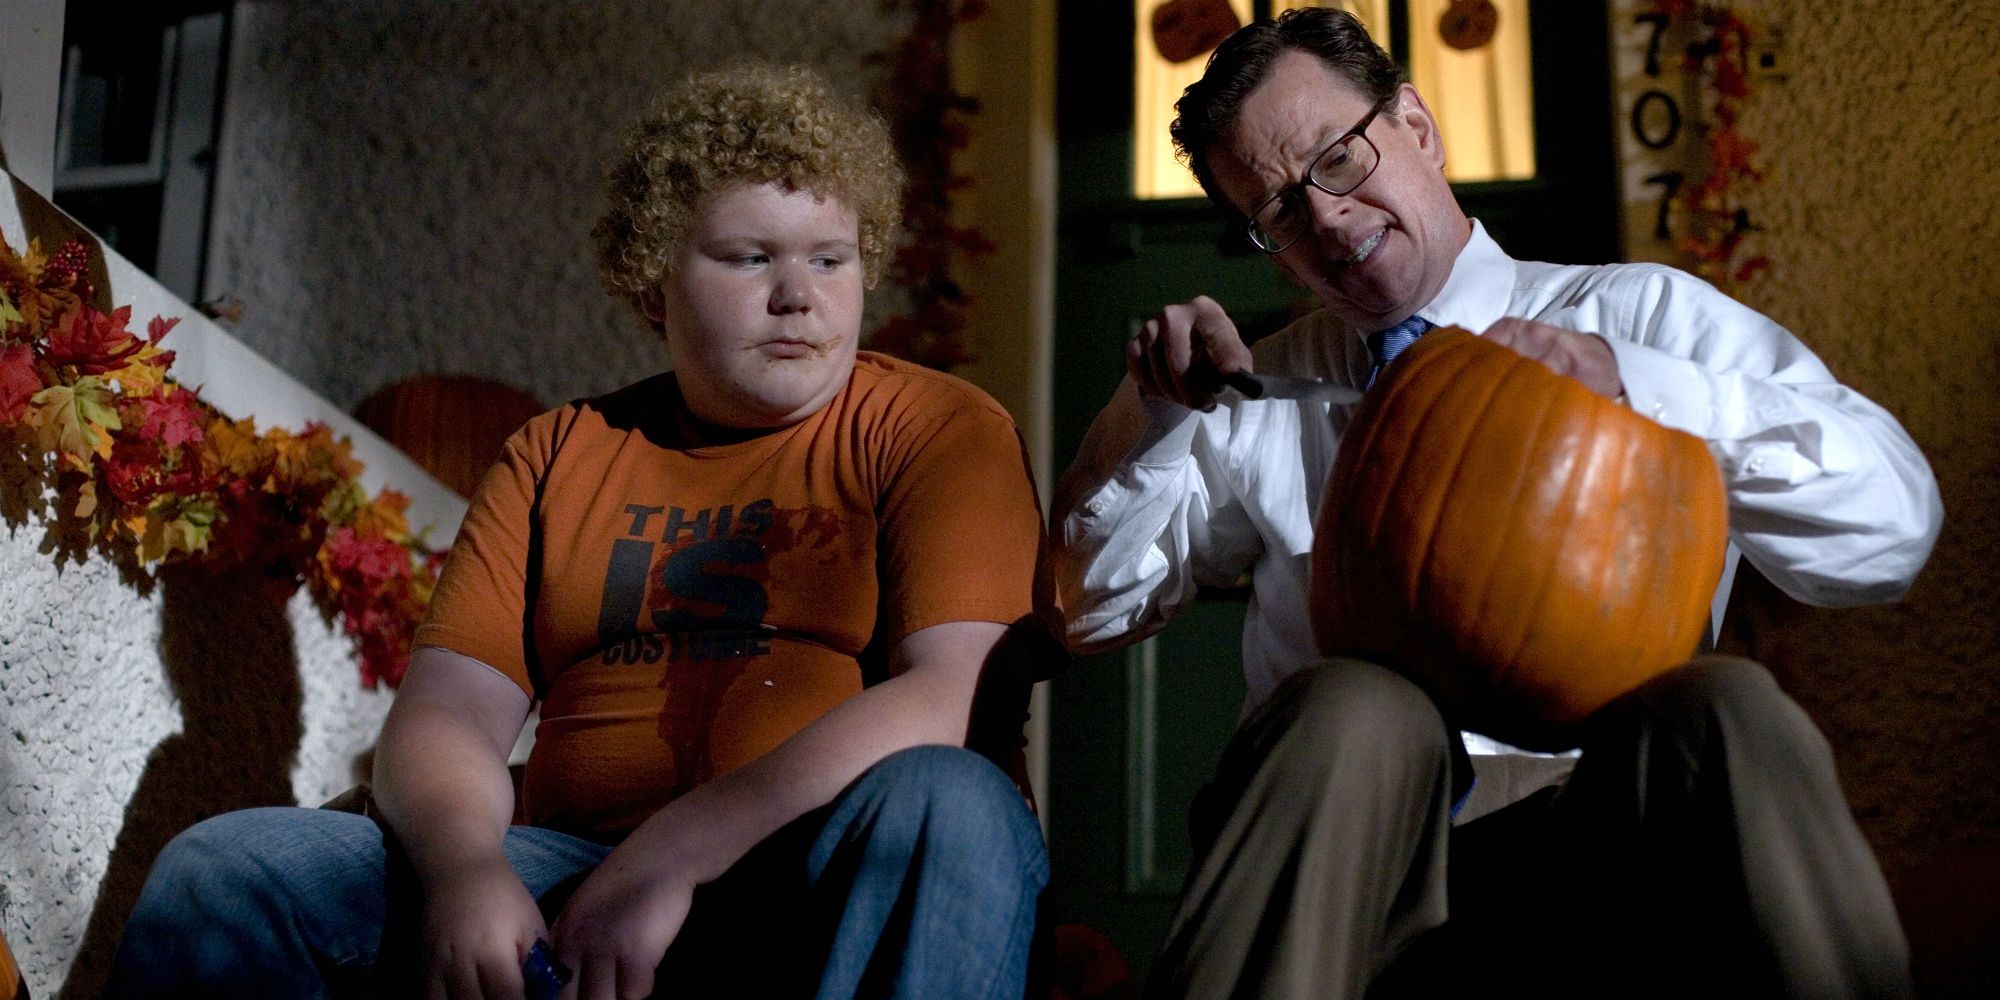 Principal Wilkins and Charlie in Trick 'r Treat